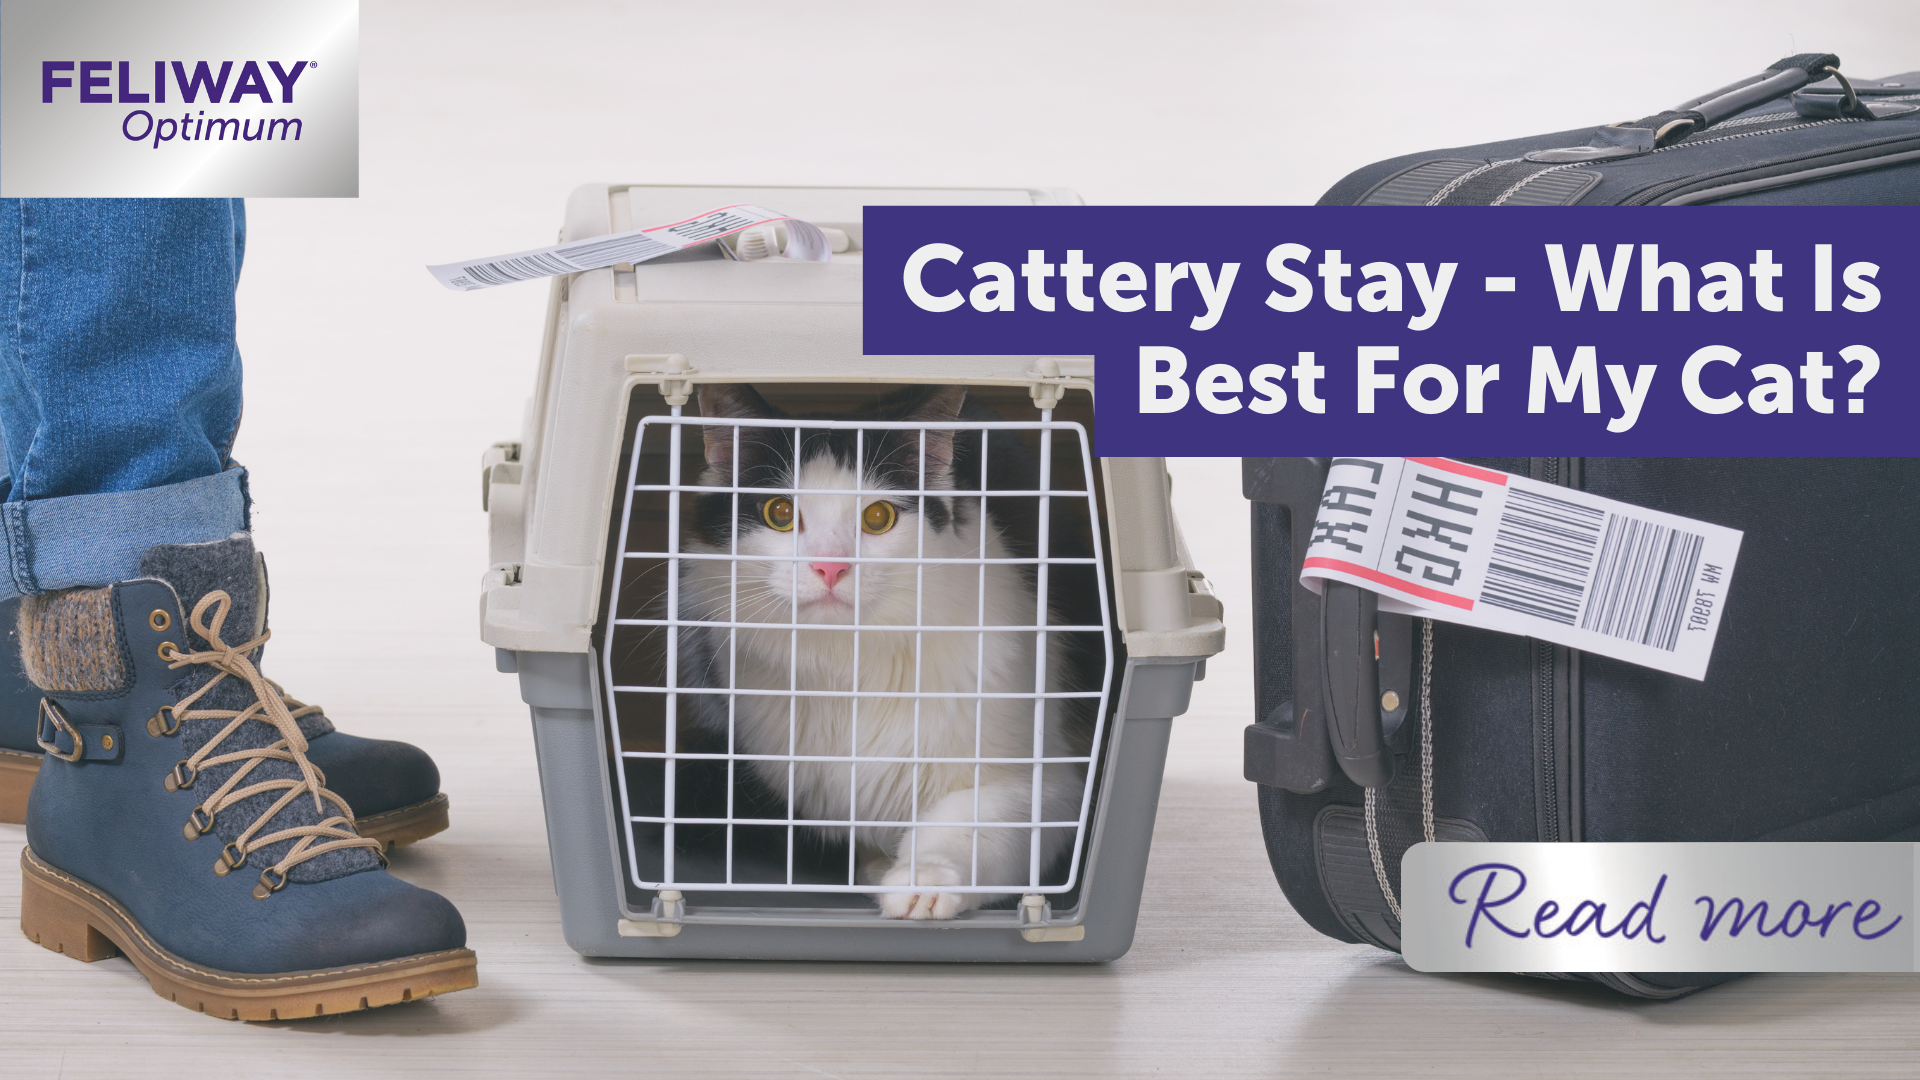 Cattery Stay - What Is Best For My Cat?